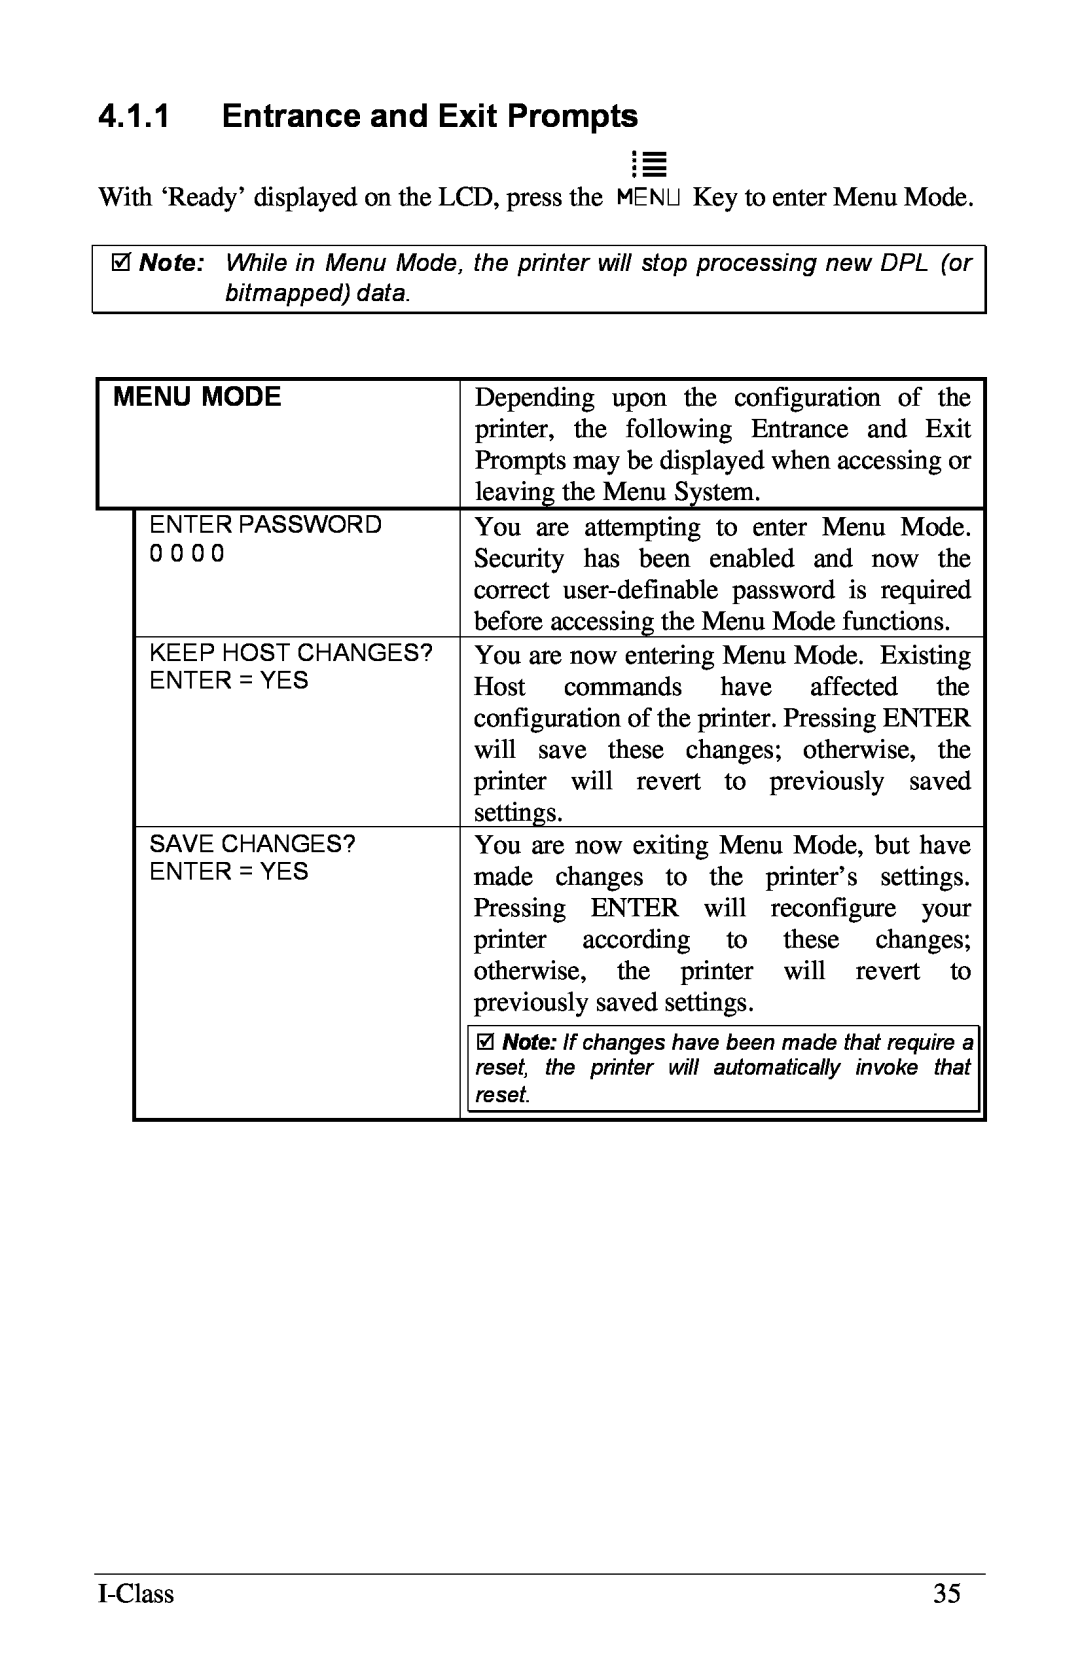 Xerox I Class manual 4.1.1Entrance and Exit Prompts, Menu Mode 